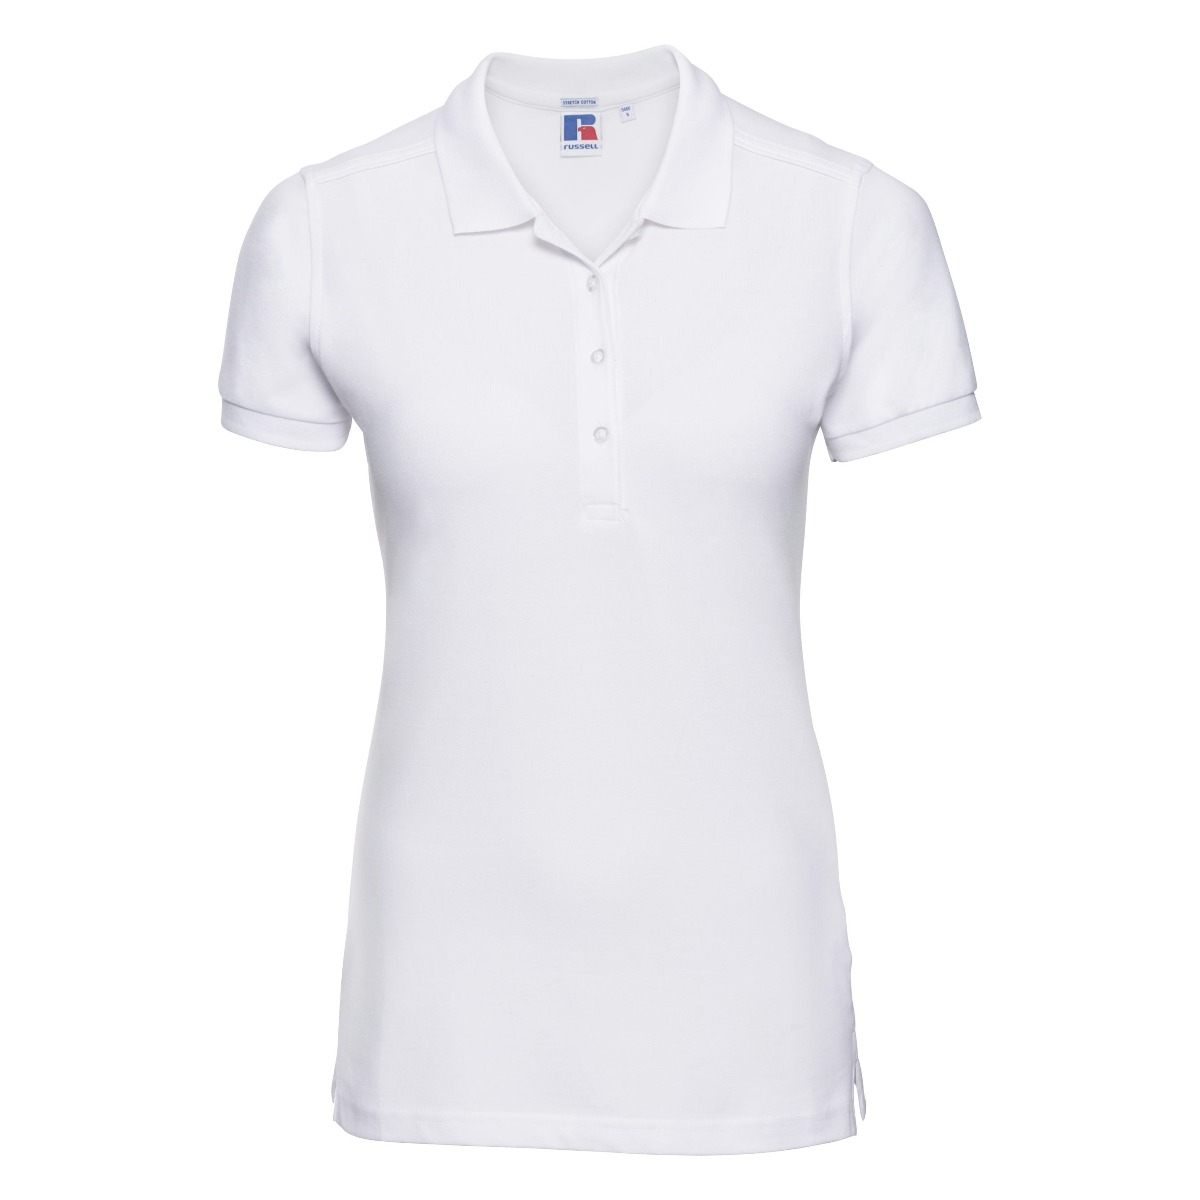 ax-httpswebsystems.s3.amazonaws.comtmp_for_downloadrussell-womens-stretch-white_3.jpg